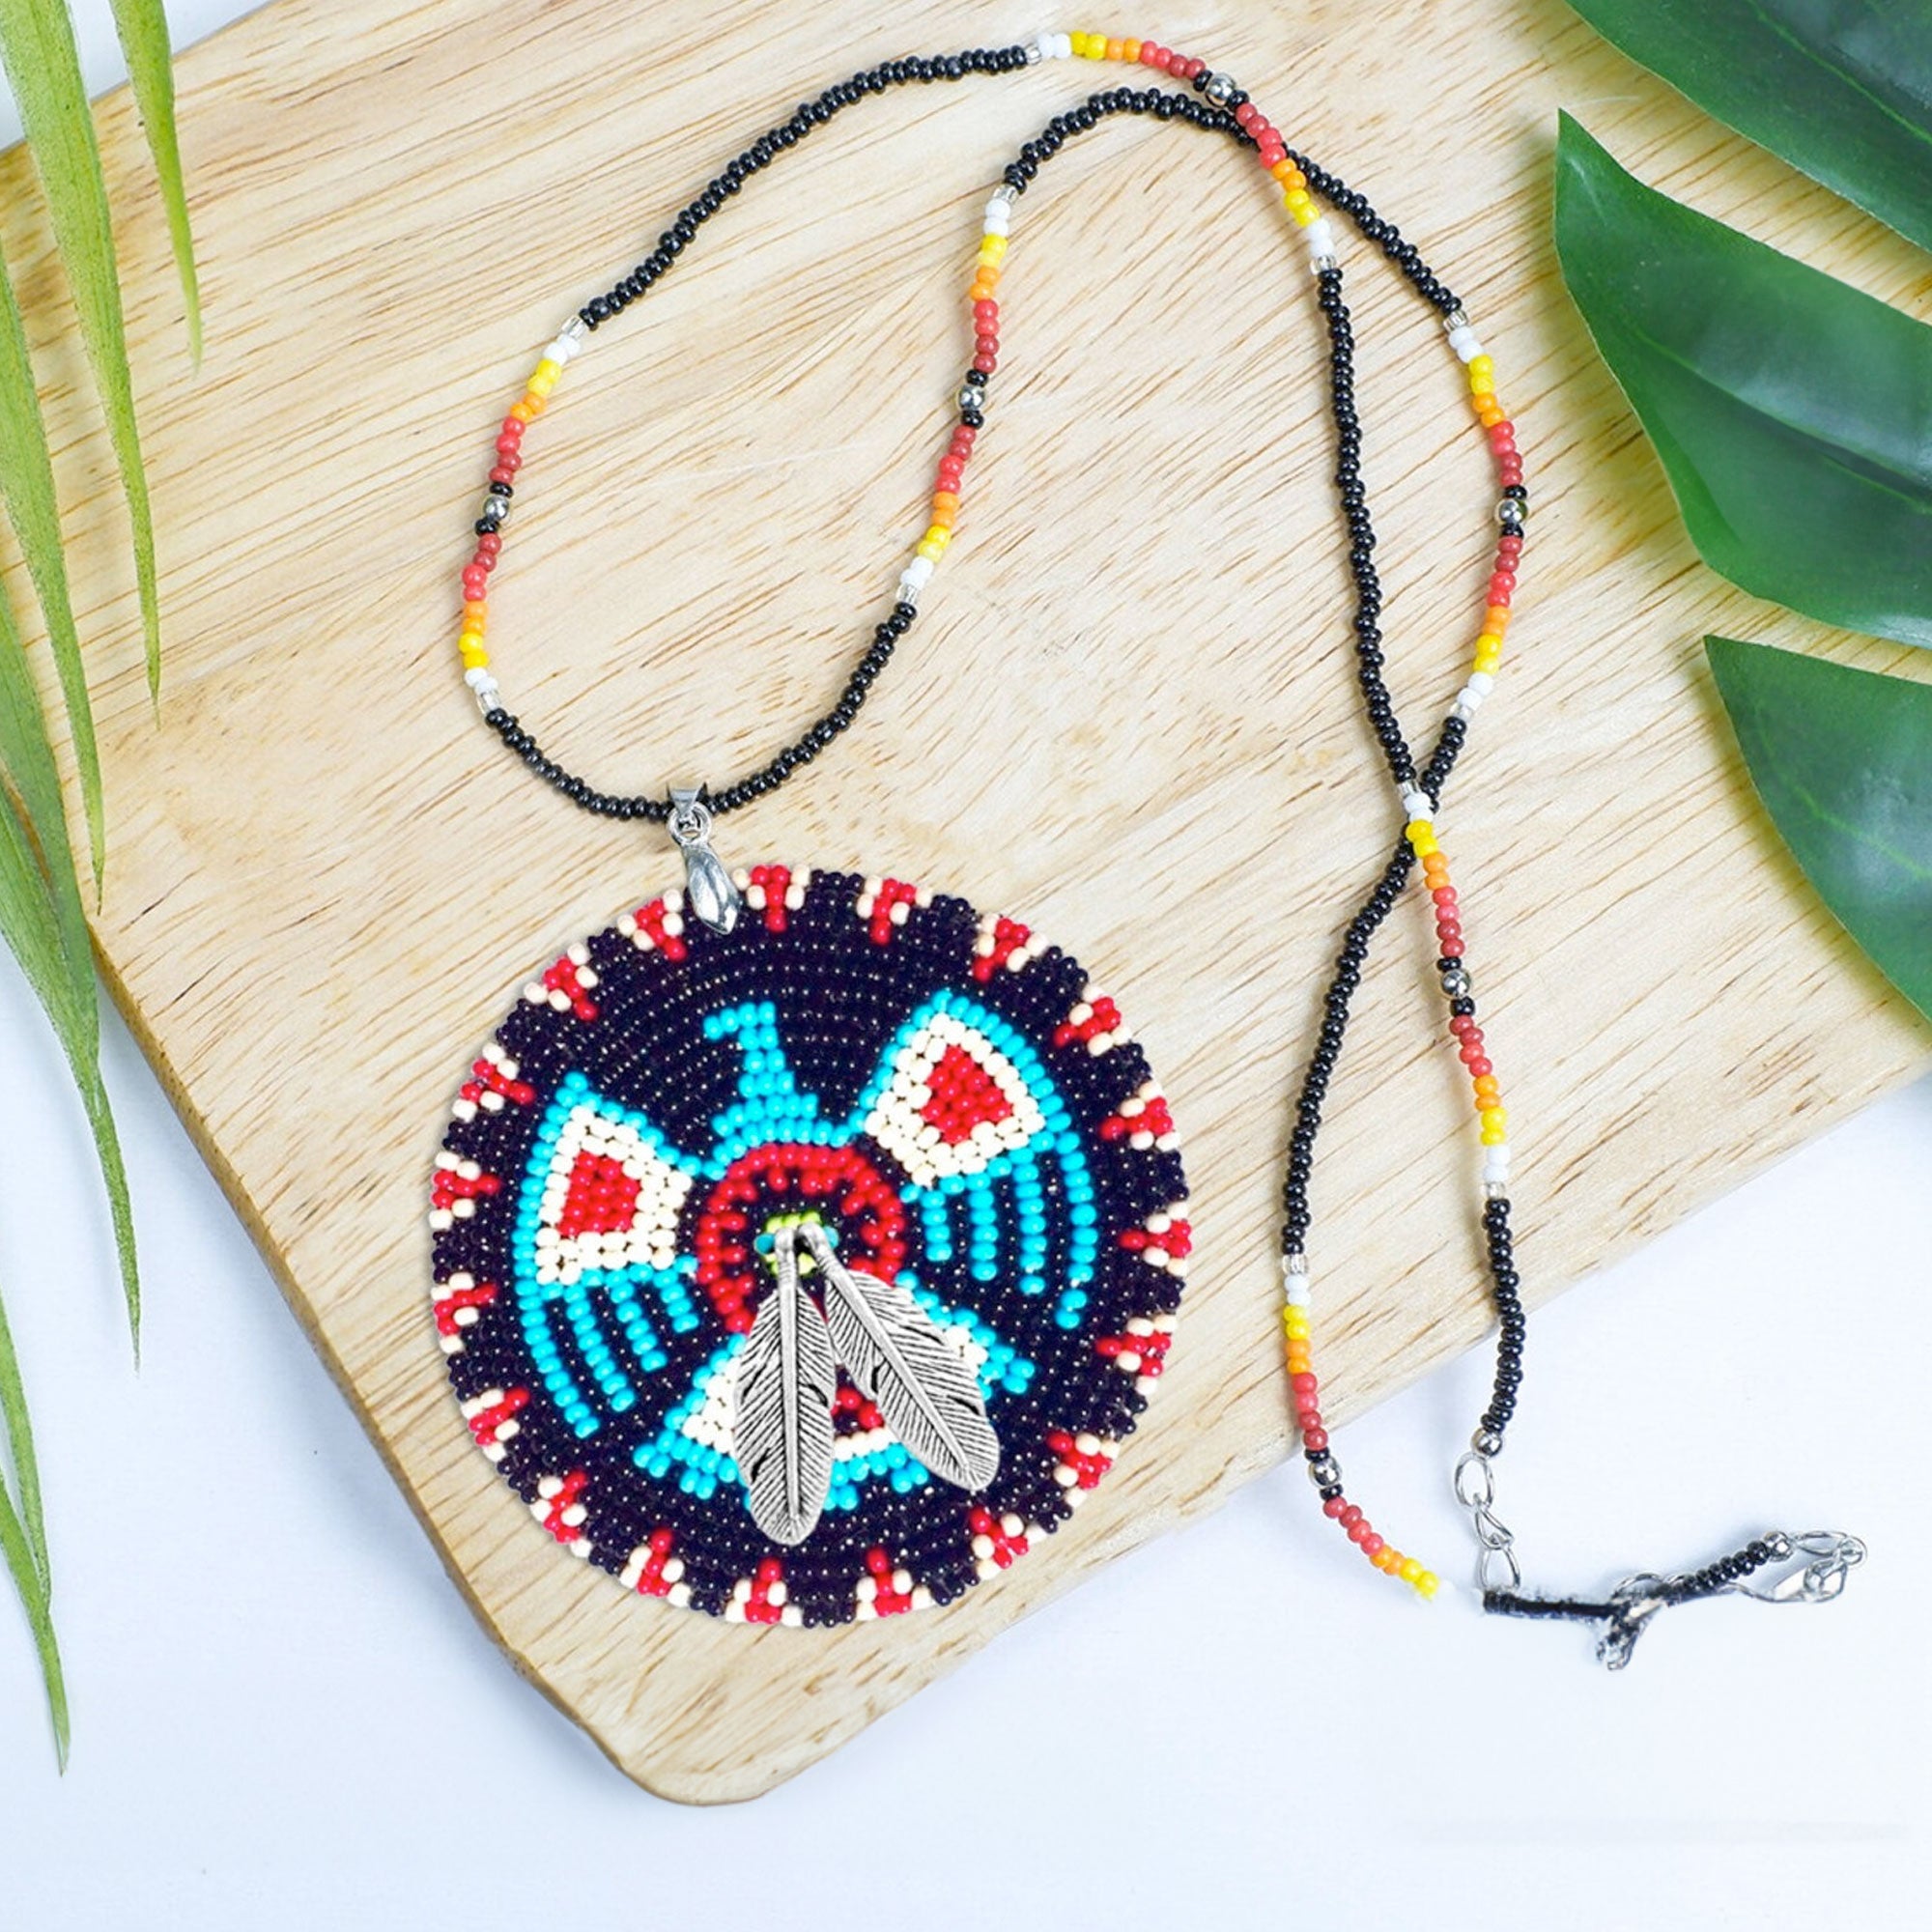 SALE 50% OFF - Dark Blue Thunderbird Beaded Patch Necklace Pendant Unisex With Native American Style